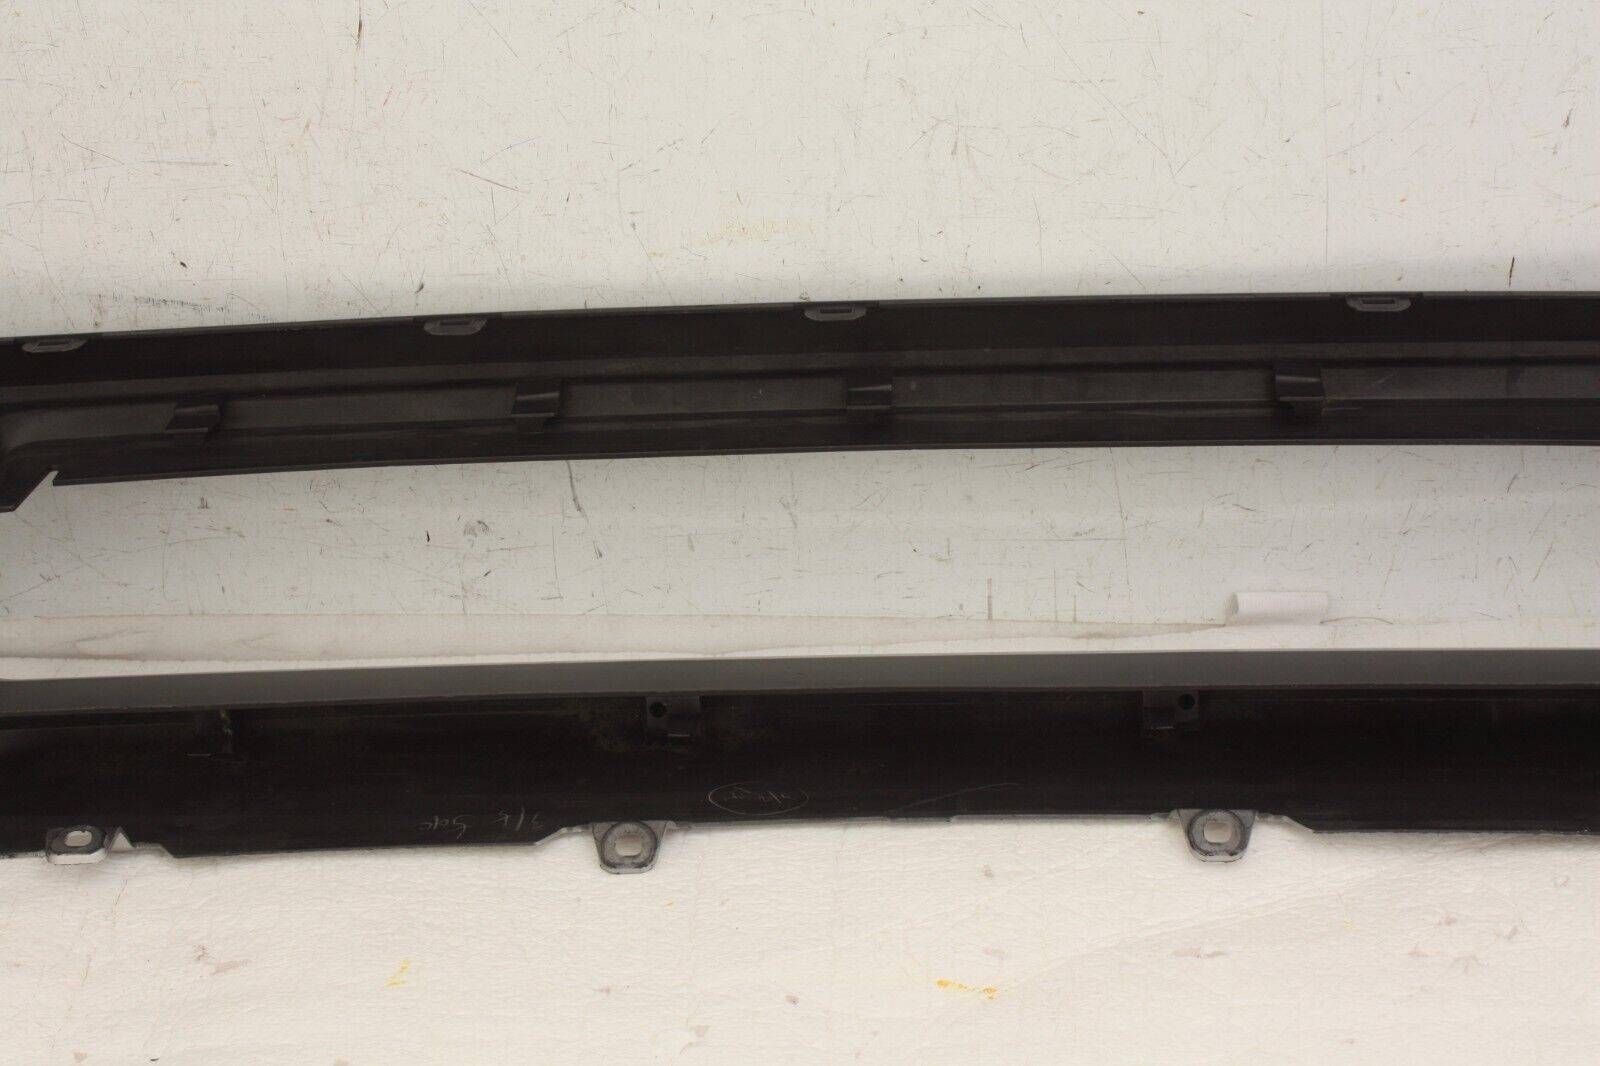 Mitsubishi-Outlander-Front-Bumper-Lower-Section-2018-TO-2021-6405A269-DAMAGED-176393343790-20